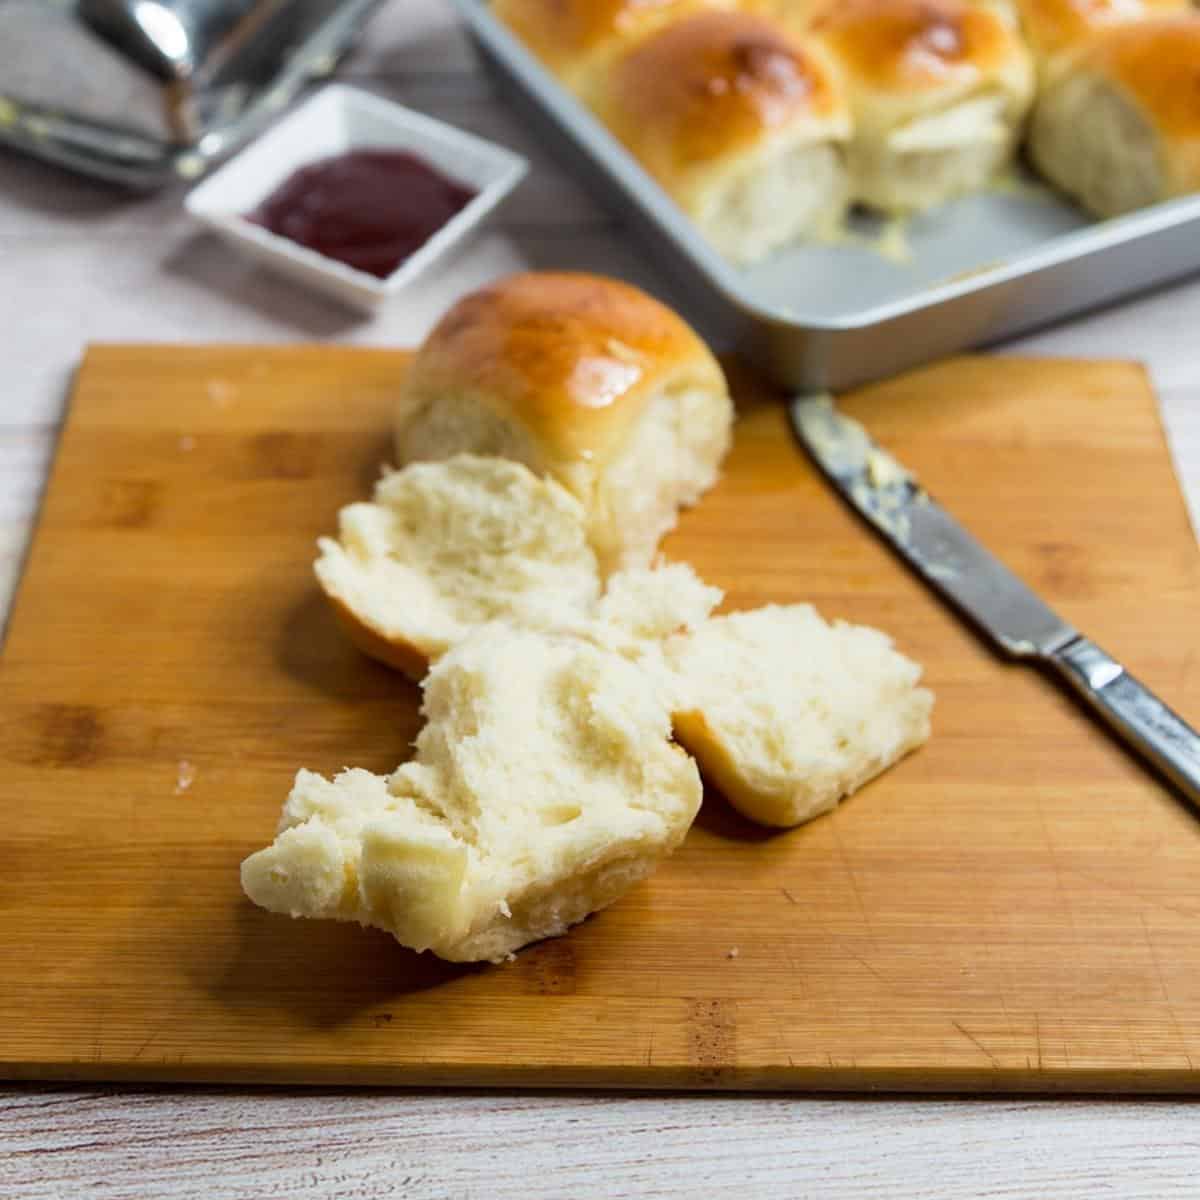 An opened dinner rolls showing the light and fluffy inside.